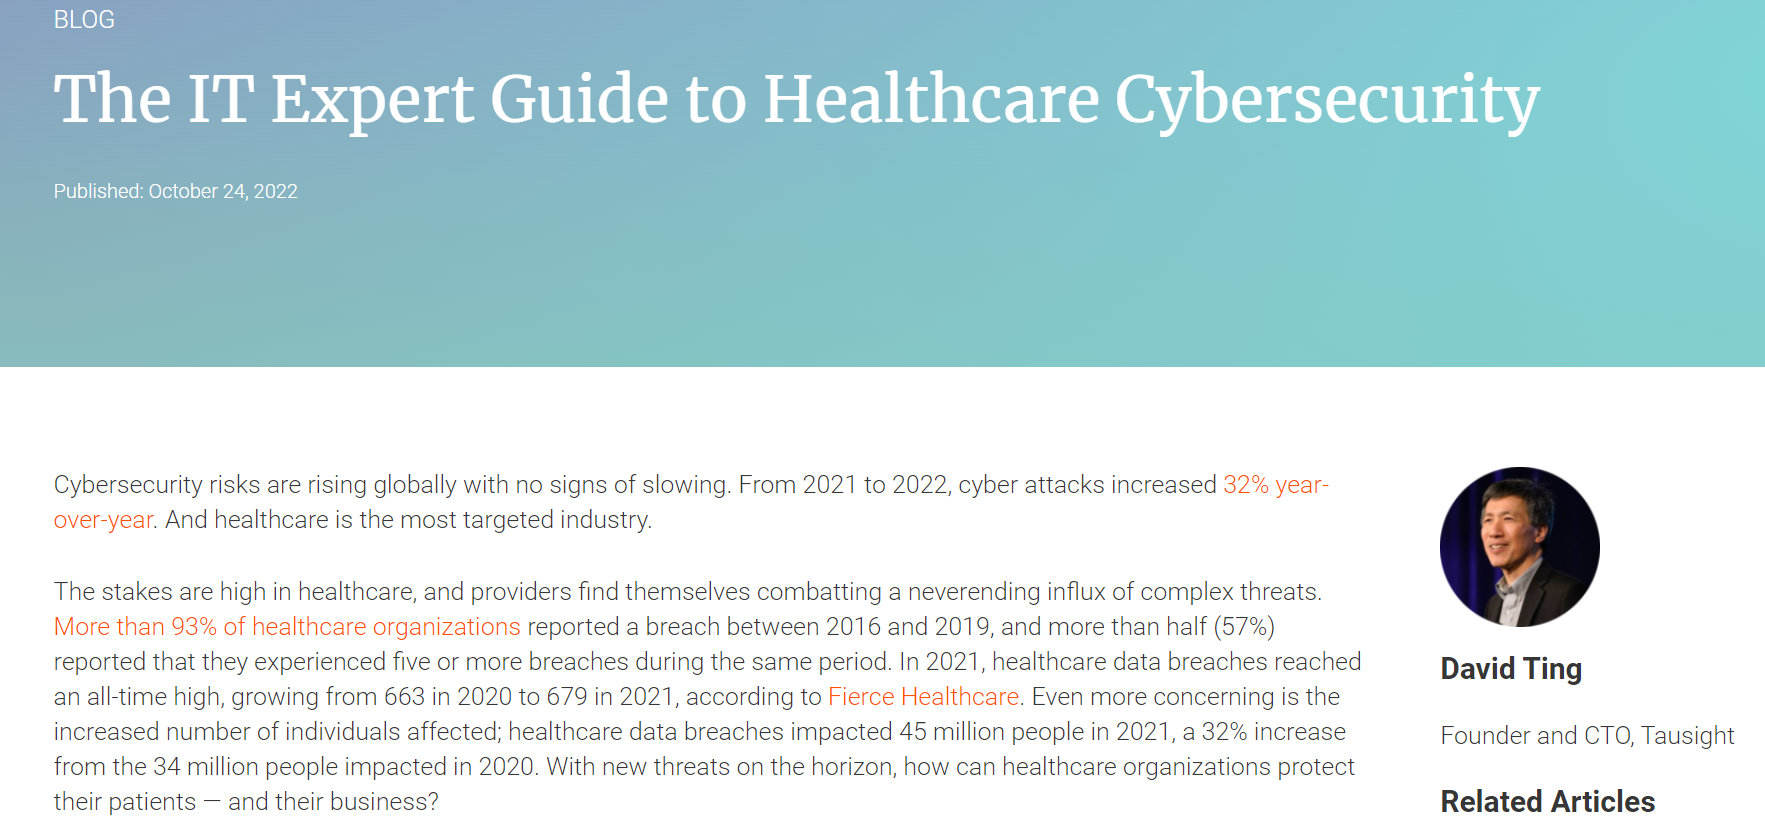 The IT Expert Guide to Healthcare Cybersecurity